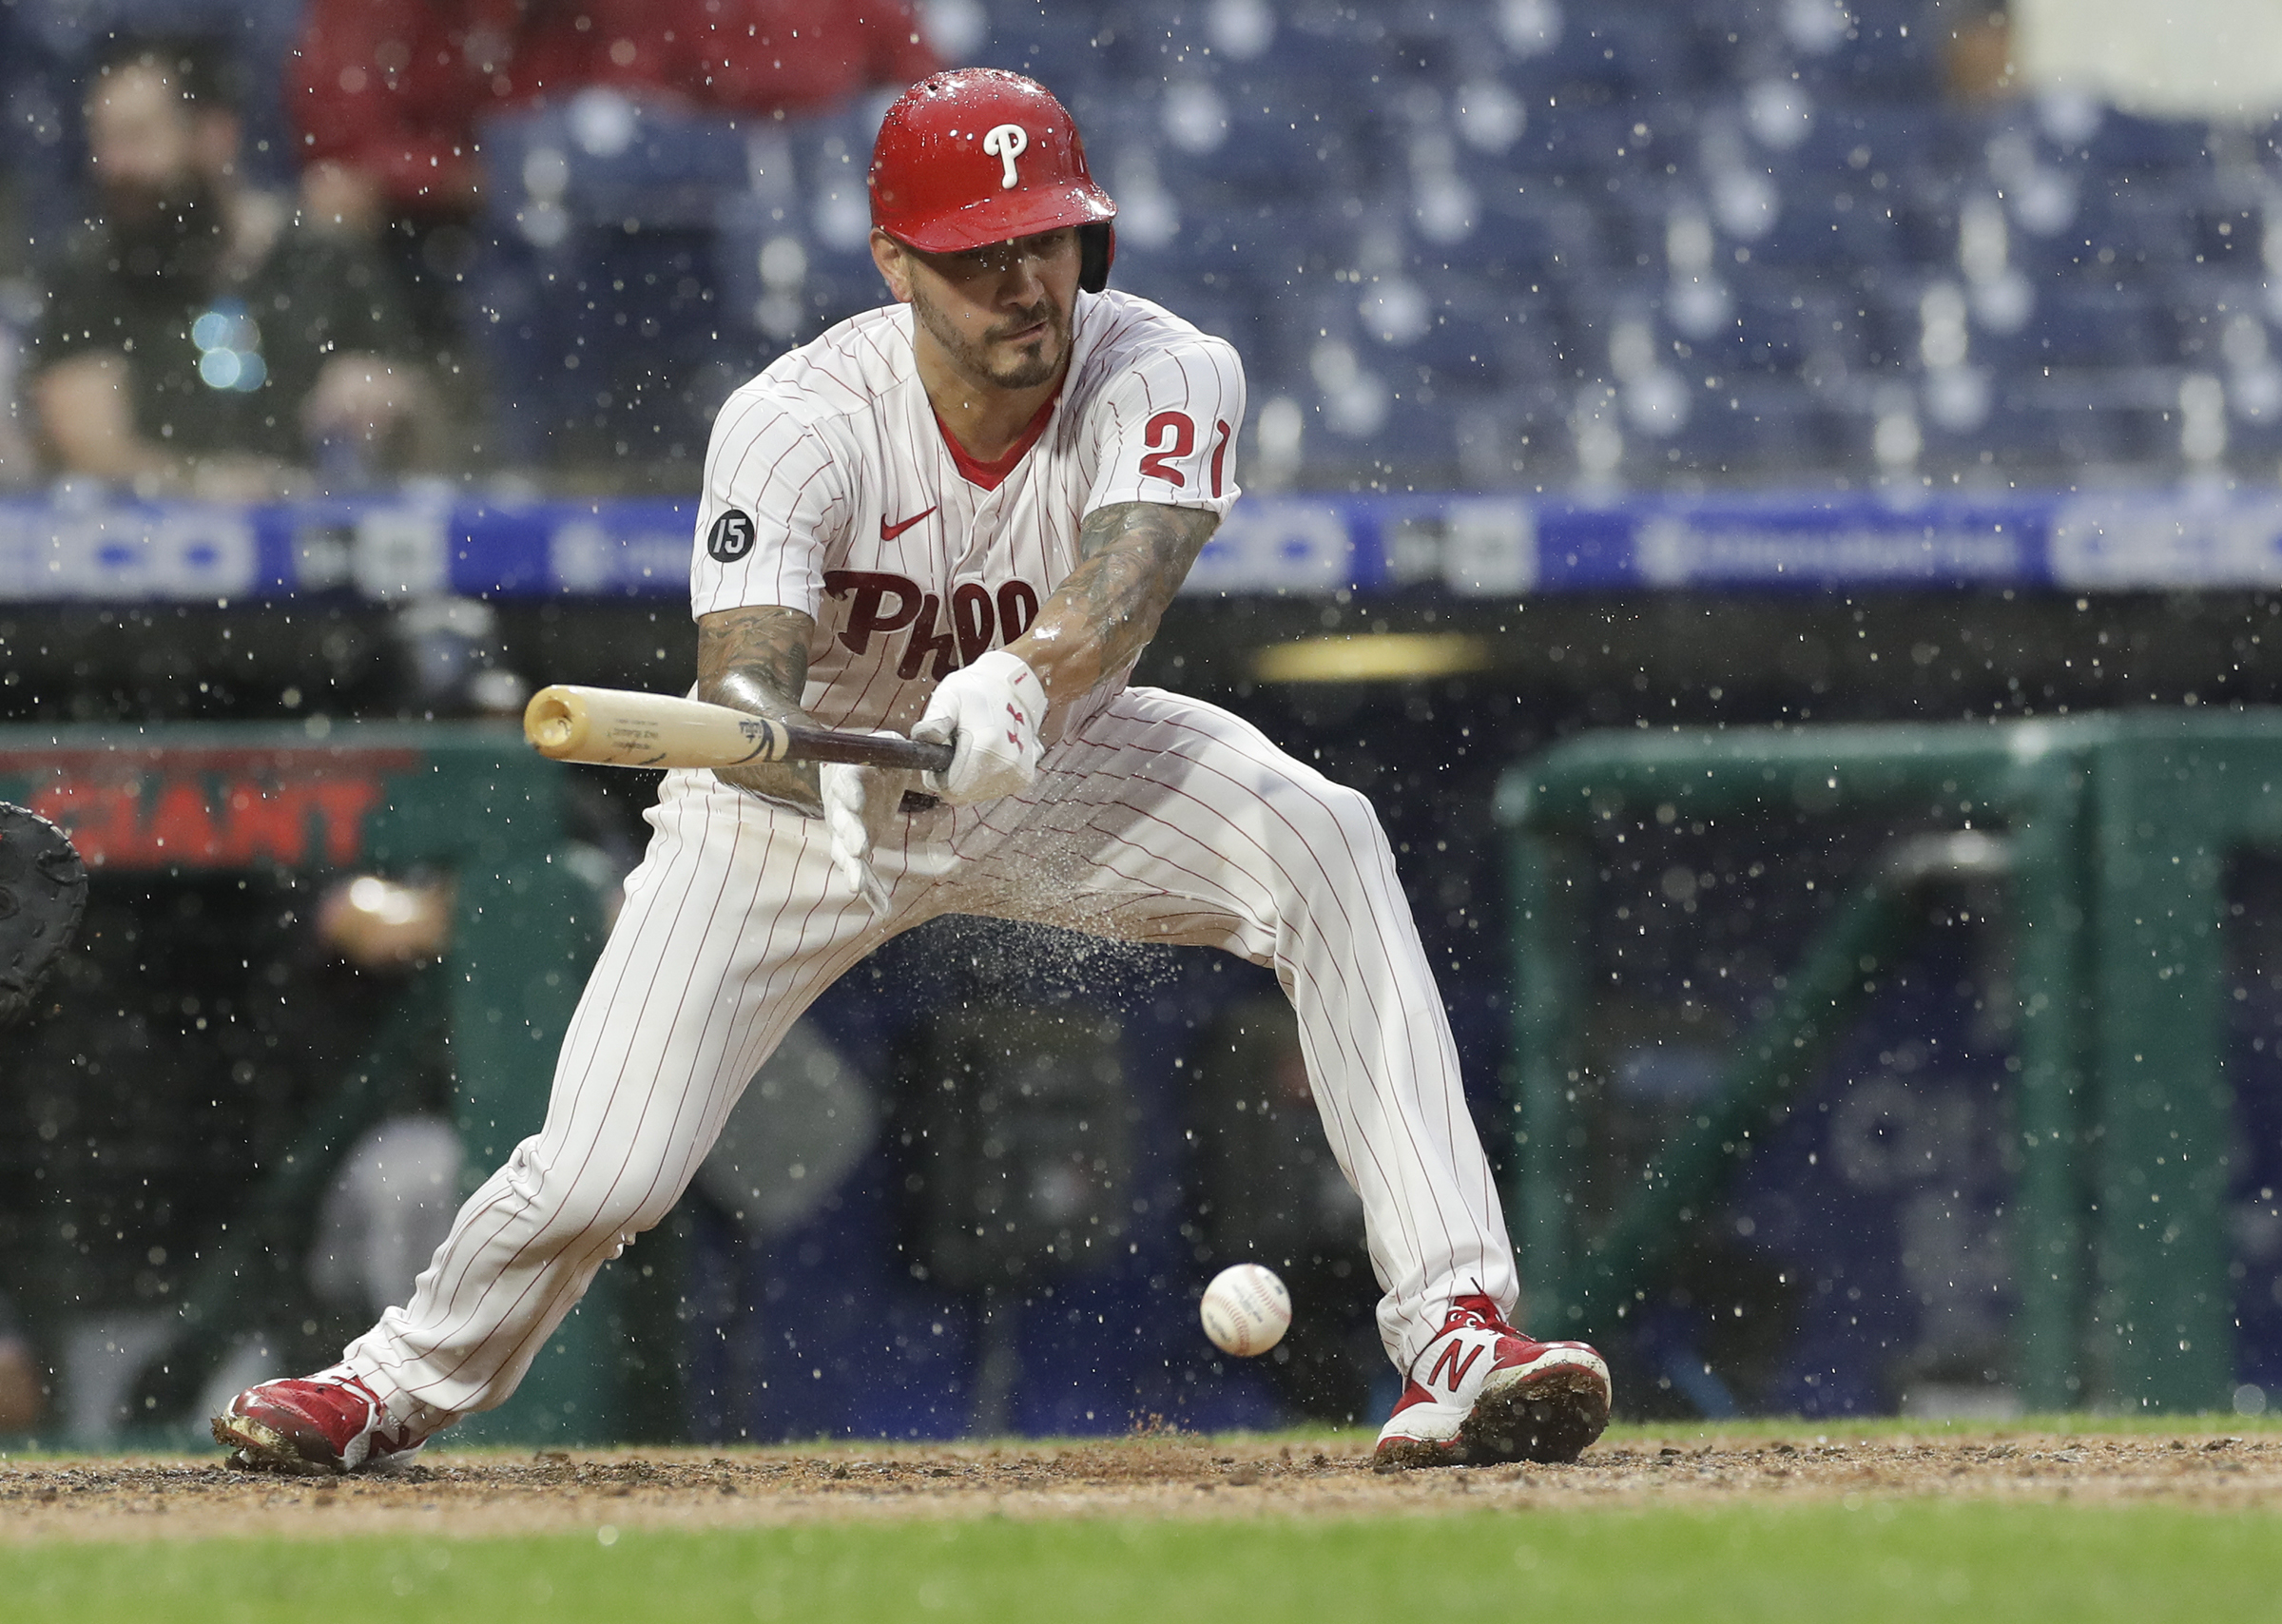 Realmuto powers Phils over Marlins to finish suspended game – The